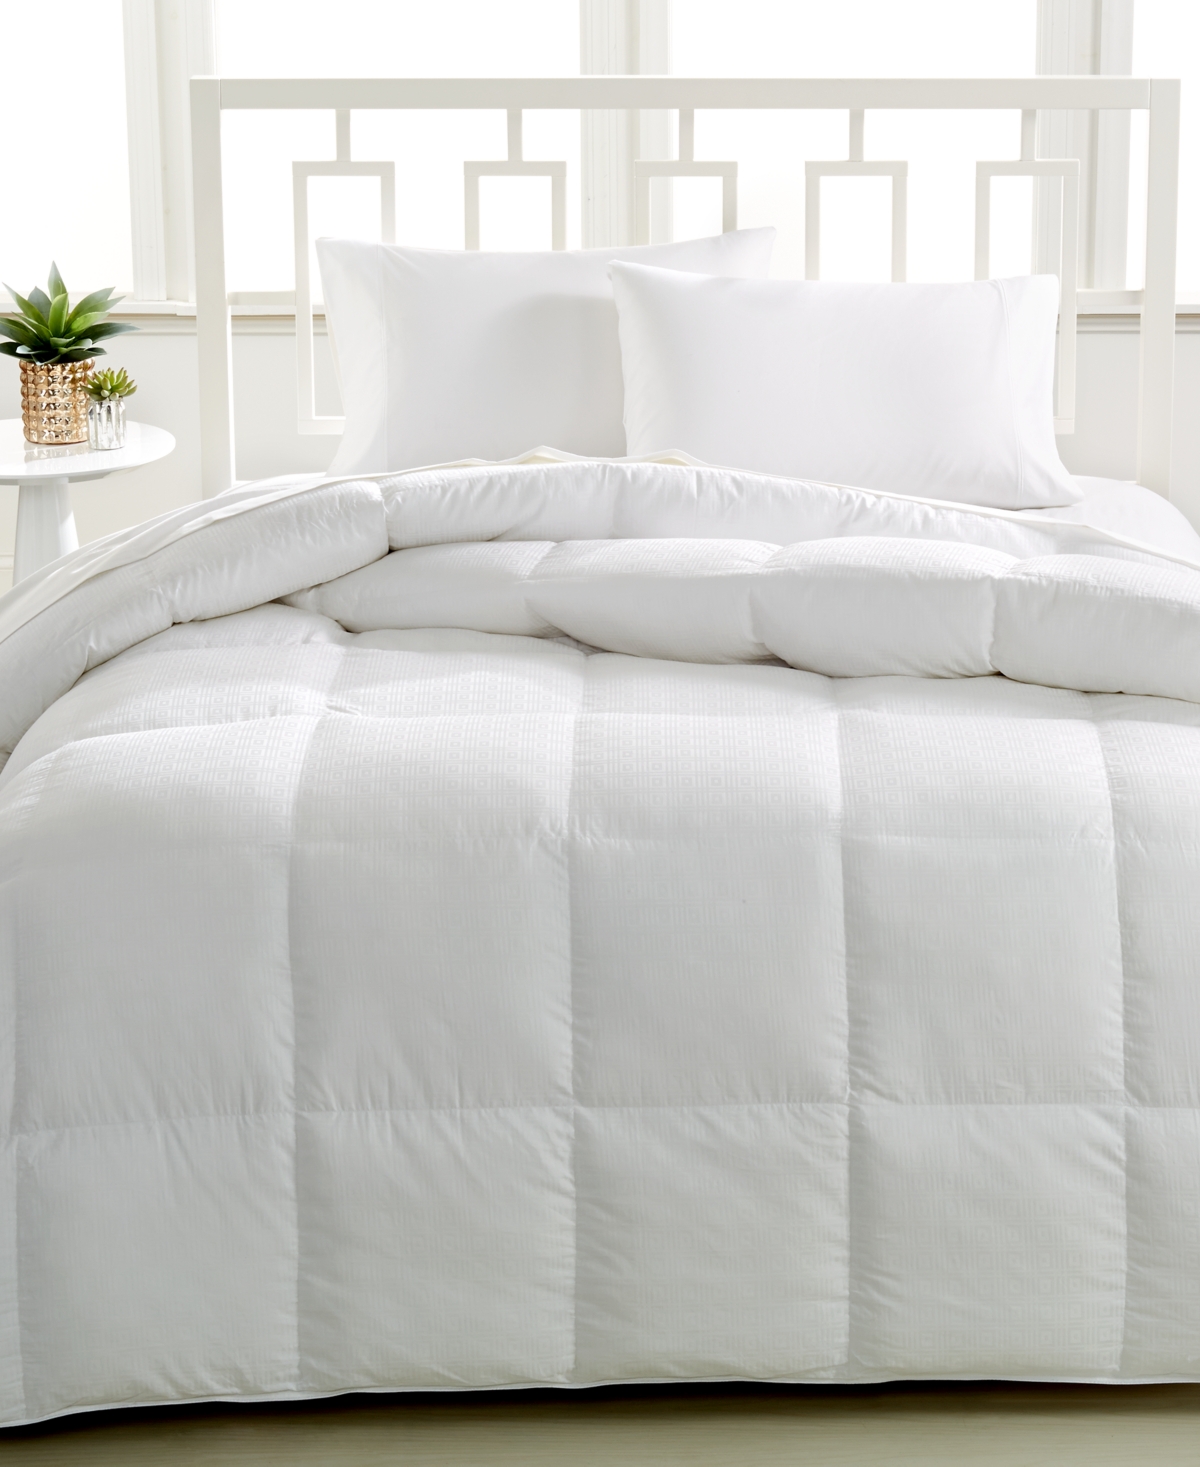 Hotel Collection Luxe Down Alternative King Comforter, Hypoallergenic, 450 Thread Count 100% Cotton Cover, Created for Macy's Bedding